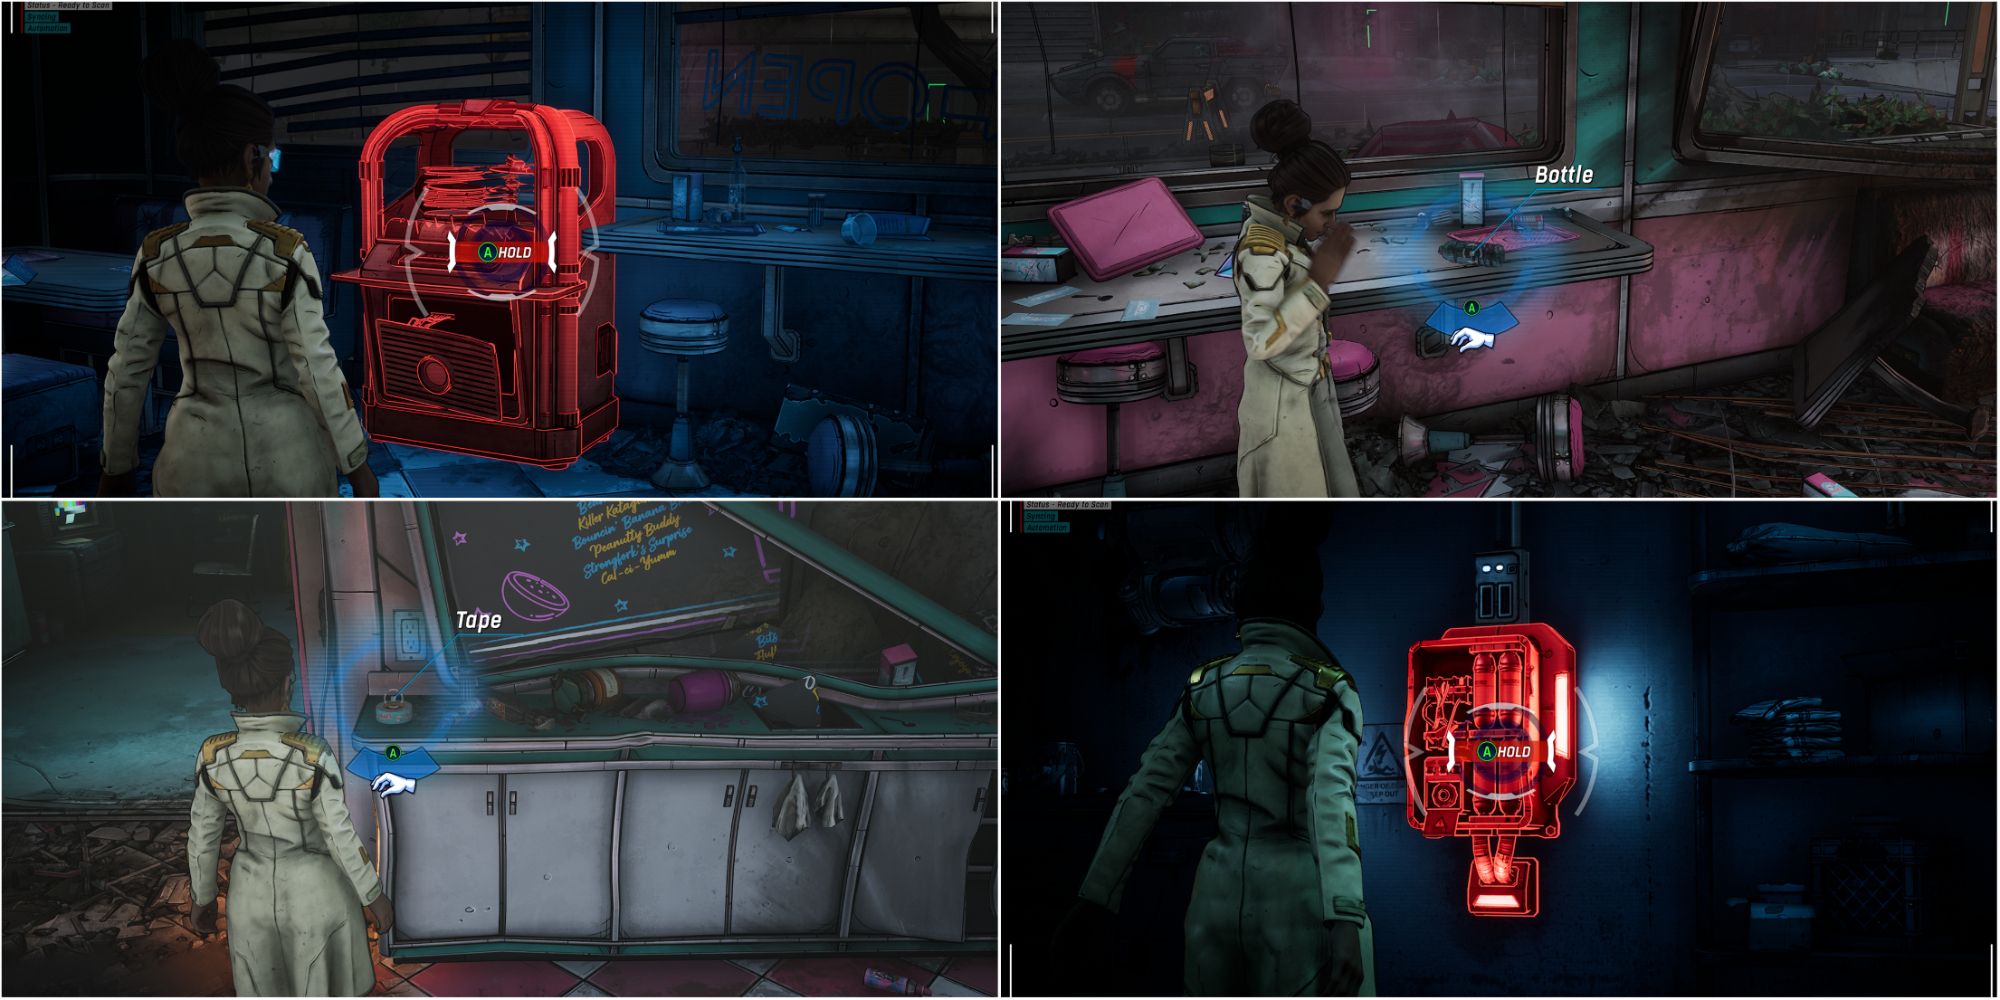 New Tales From The Borderlands Split Image Item That Fix Anu's Device